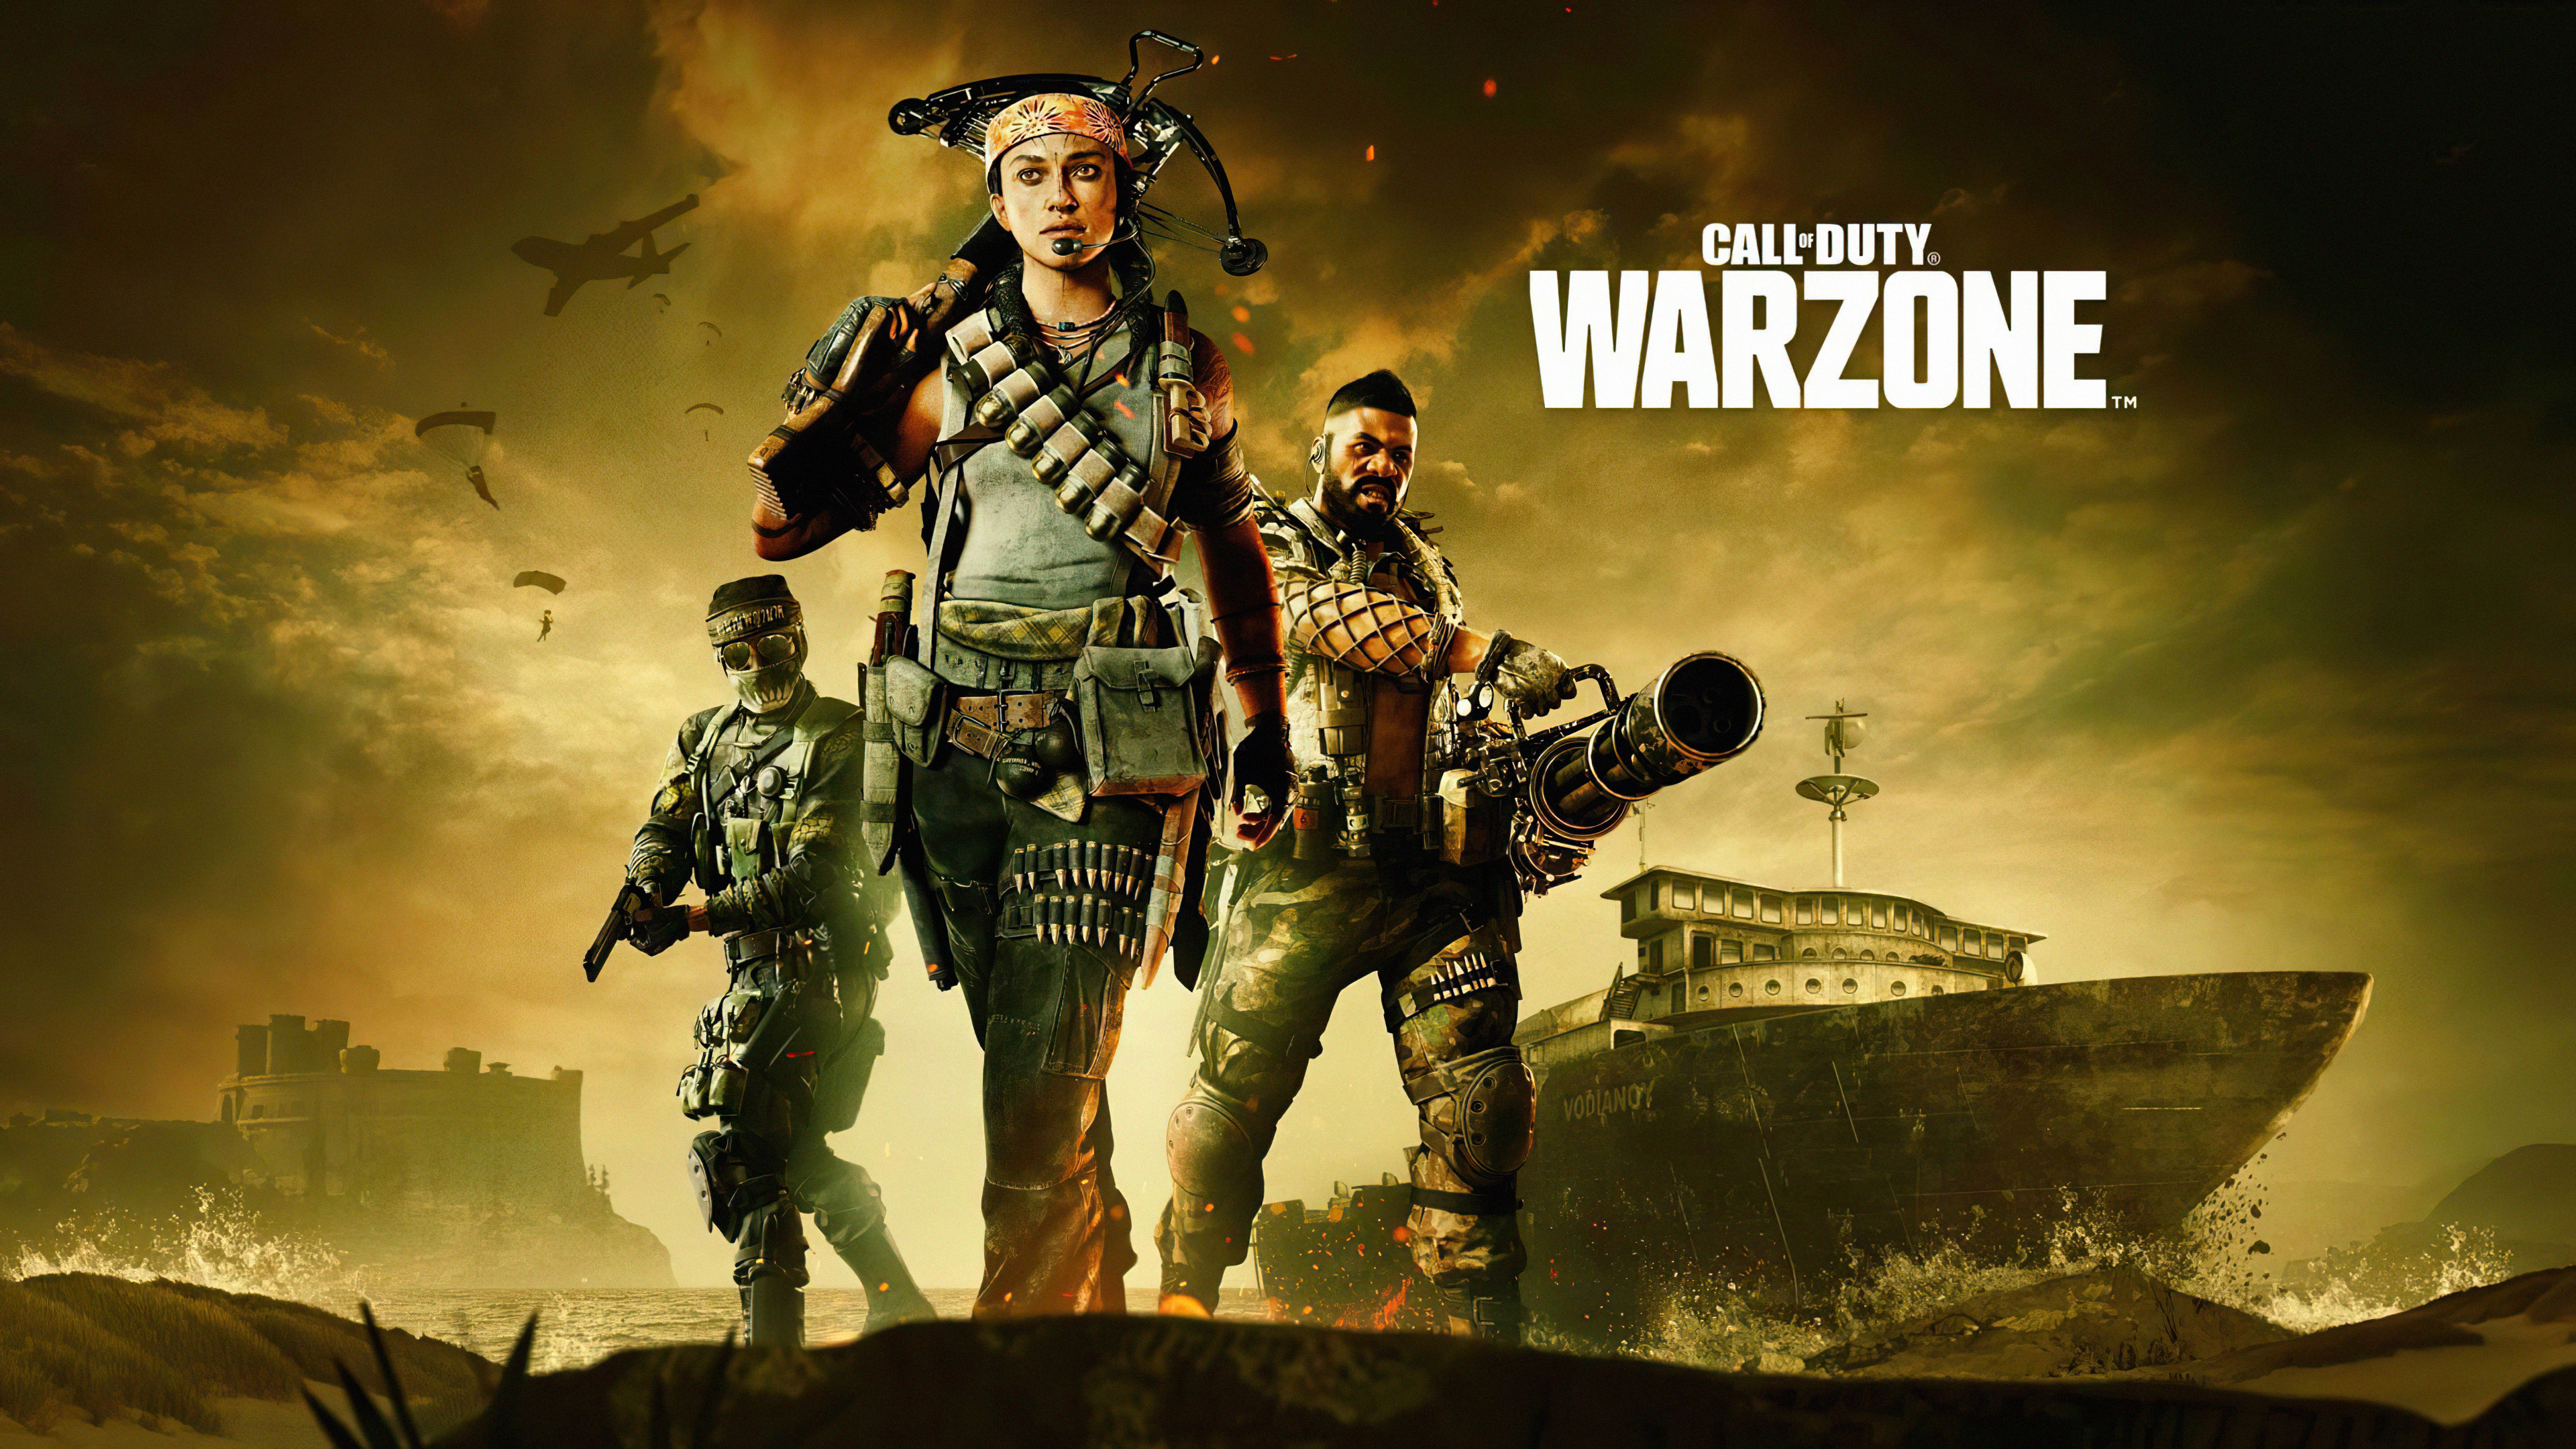 call of duty: warzone, video game, call of duty